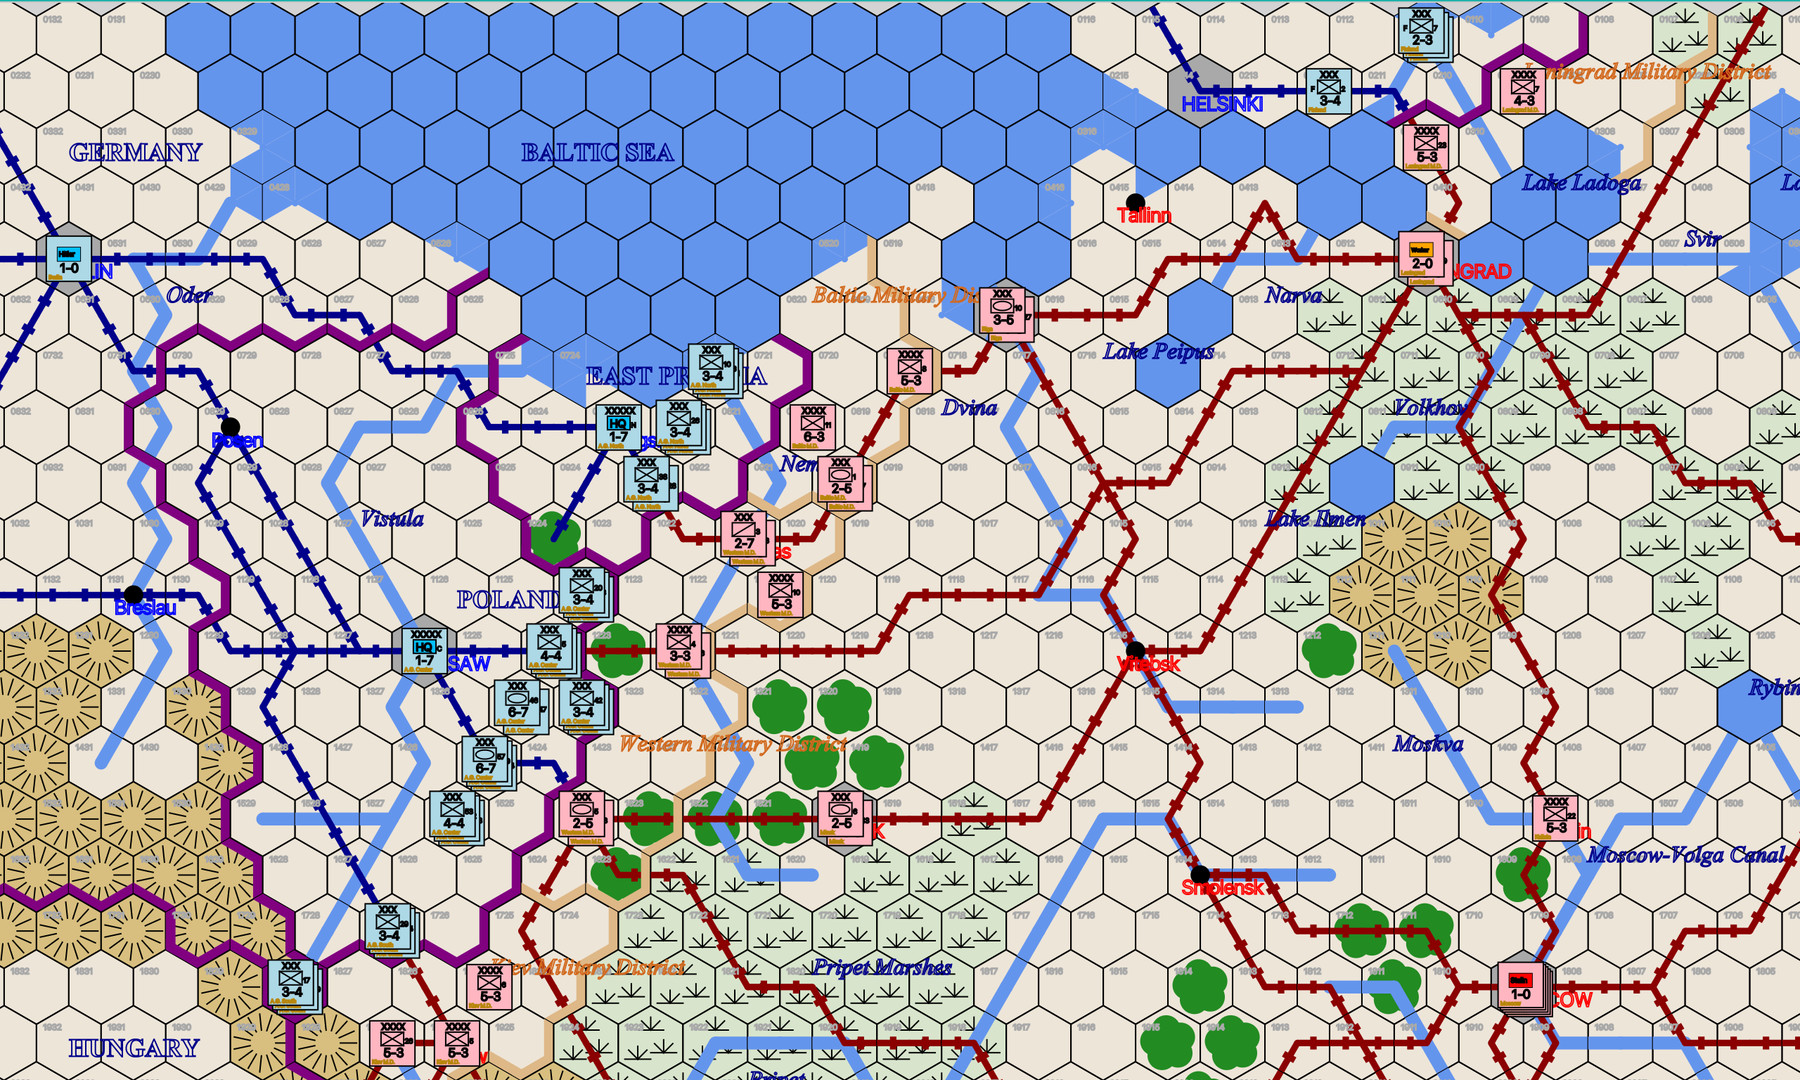 Panzers on the Steppe Free Download